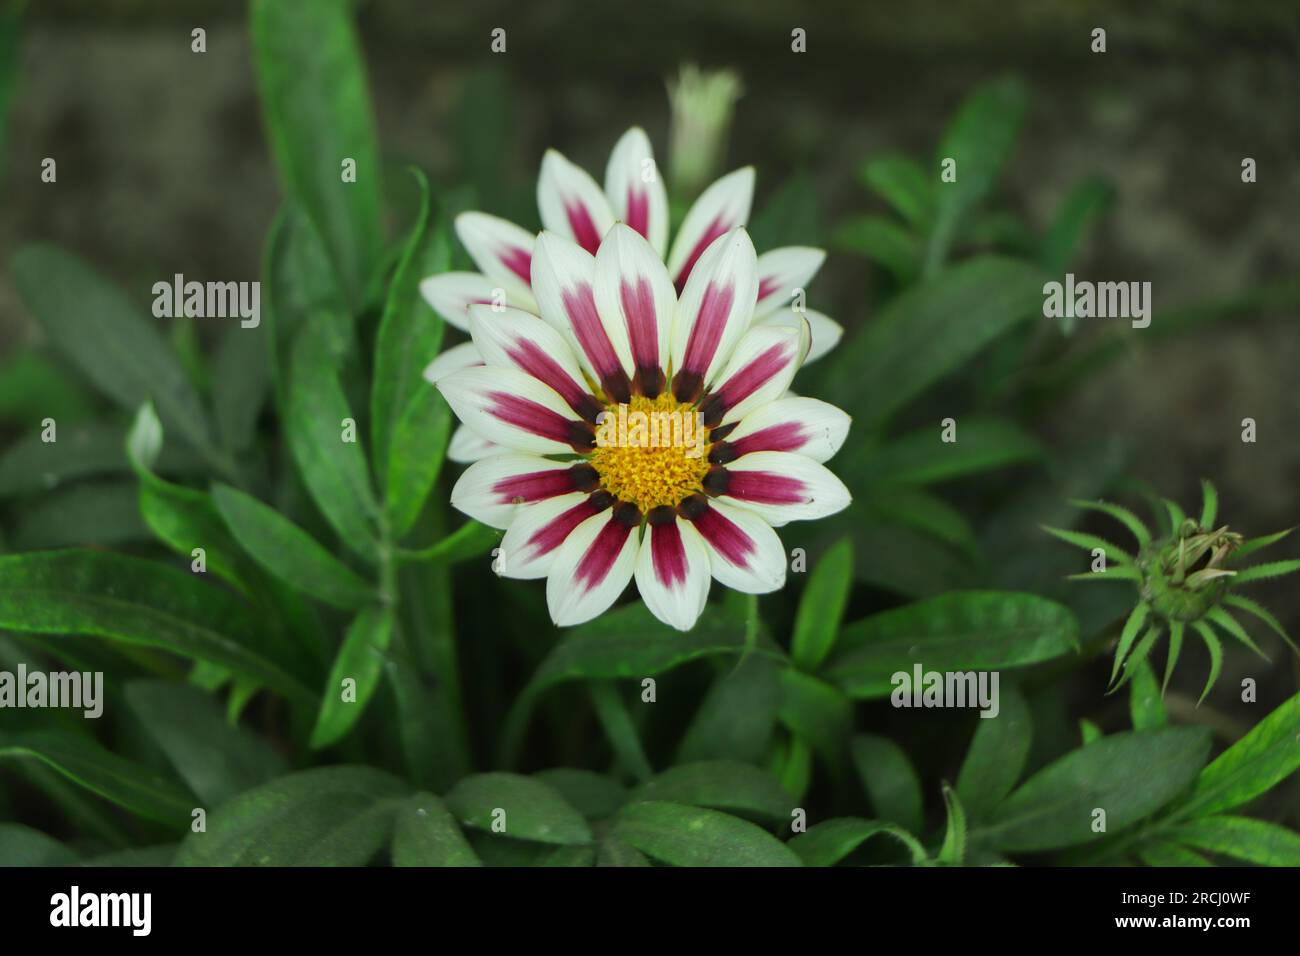 white and pink gazania flower blooming in garden Stock Photo